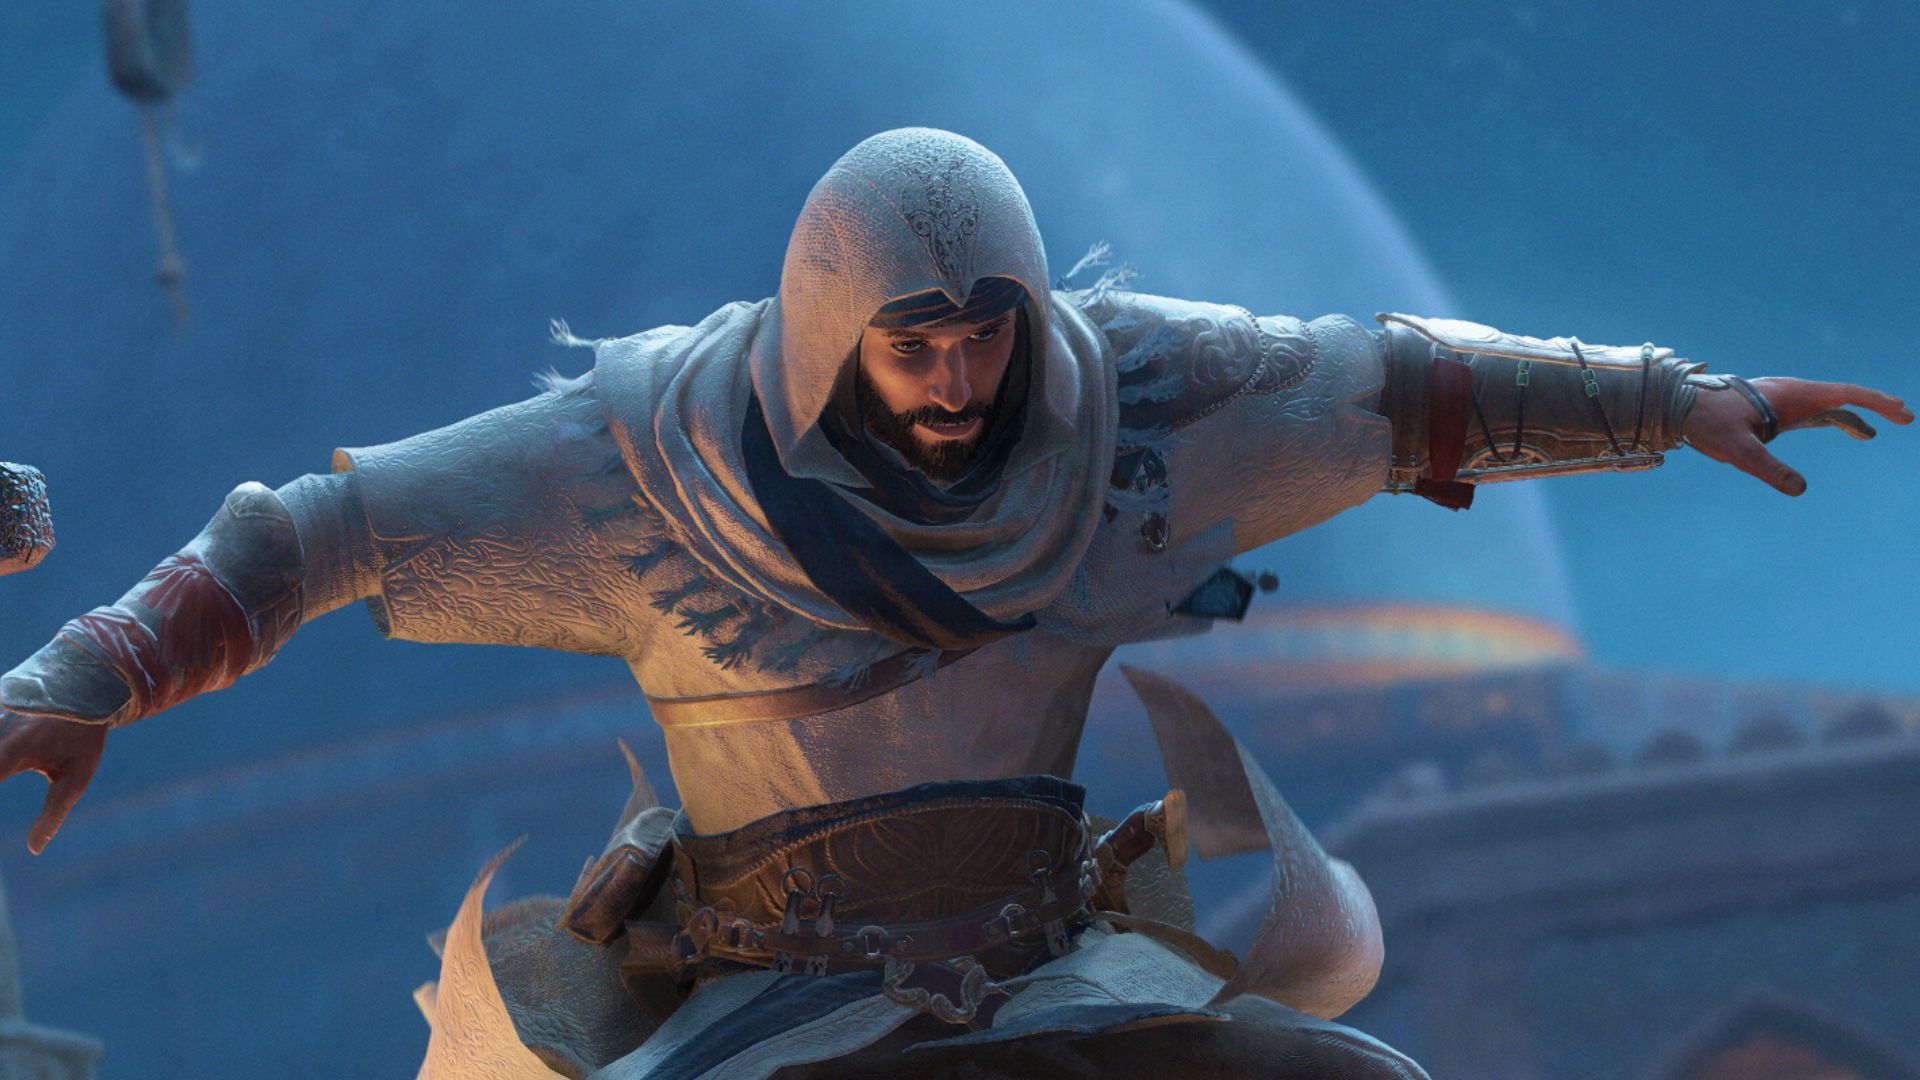 Assassin's Creed Mirage: Release Date, Gameplay, Story, and Latest